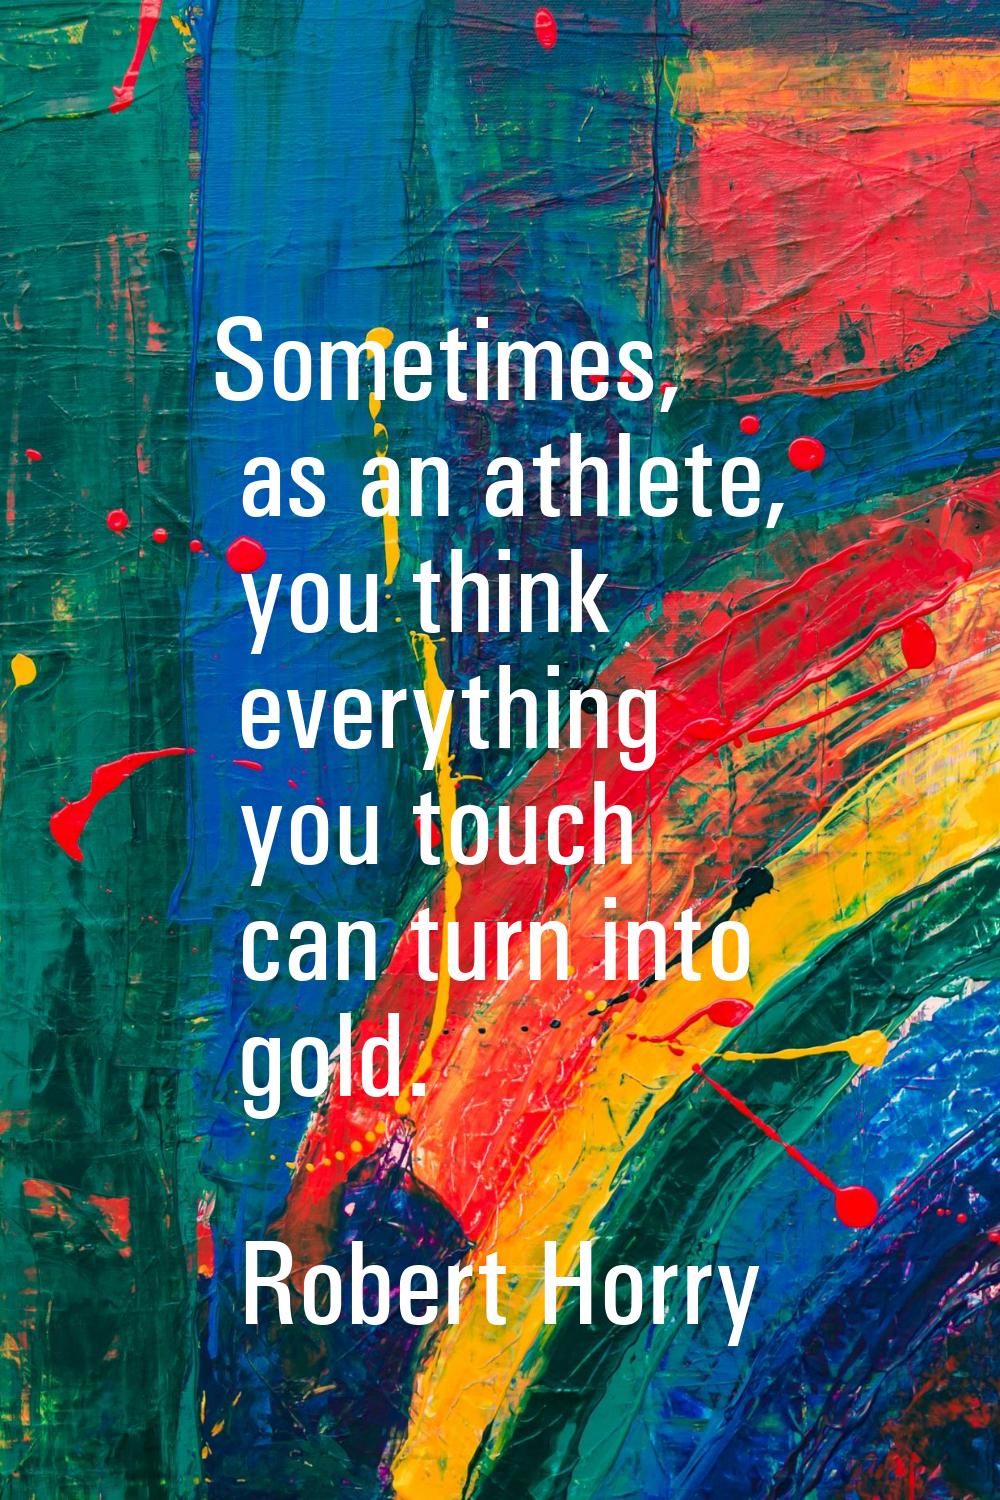 Sometimes, as an athlete, you think everything you touch can turn into gold.